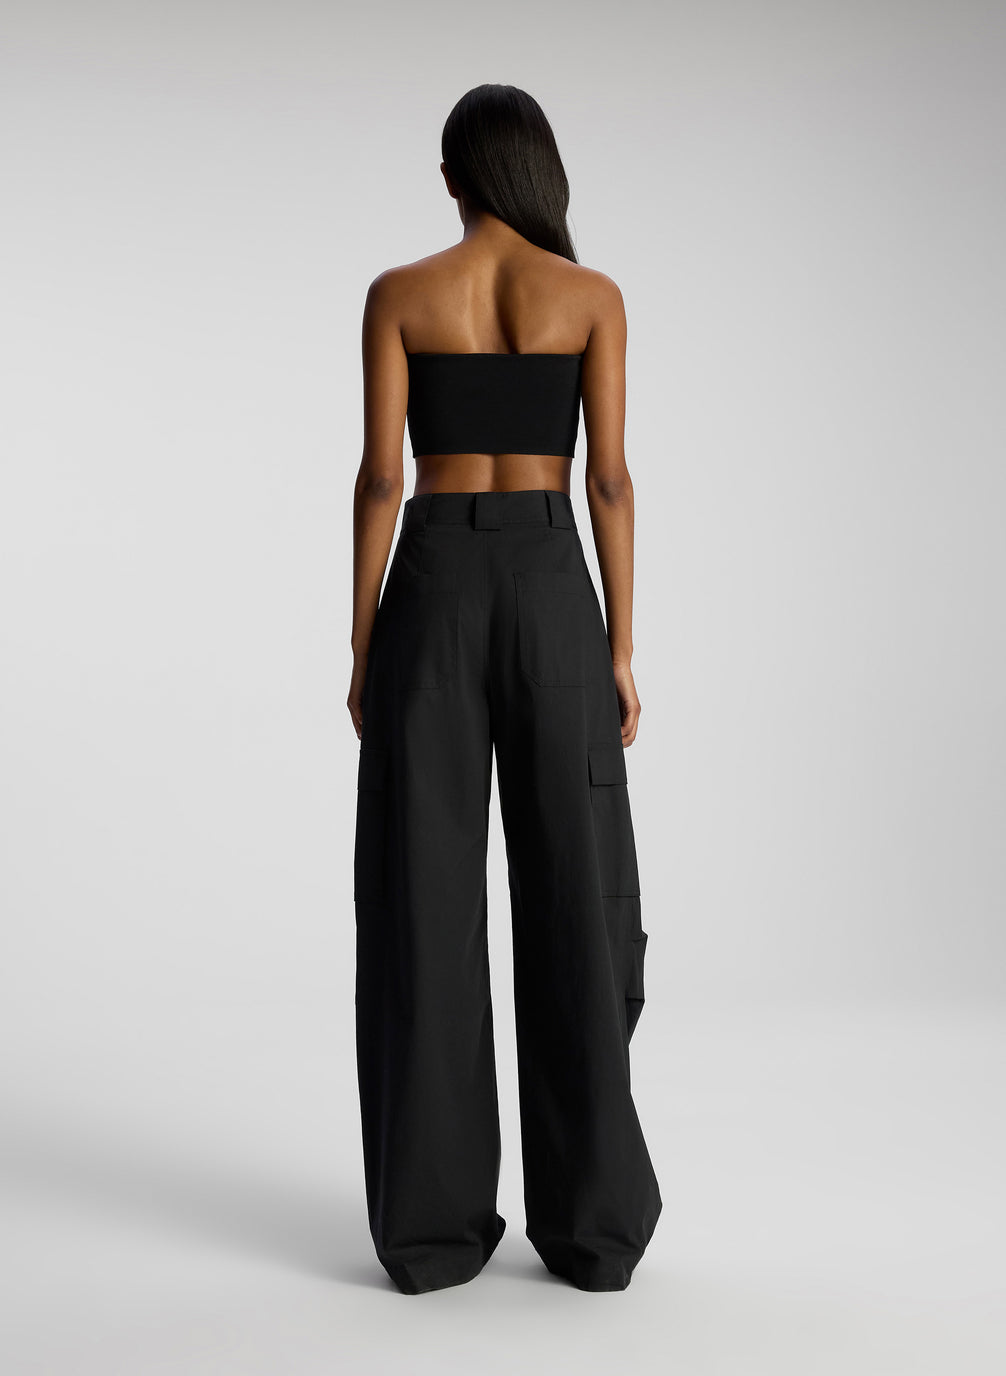 back view of woman wearing black strapless crop top and black pants